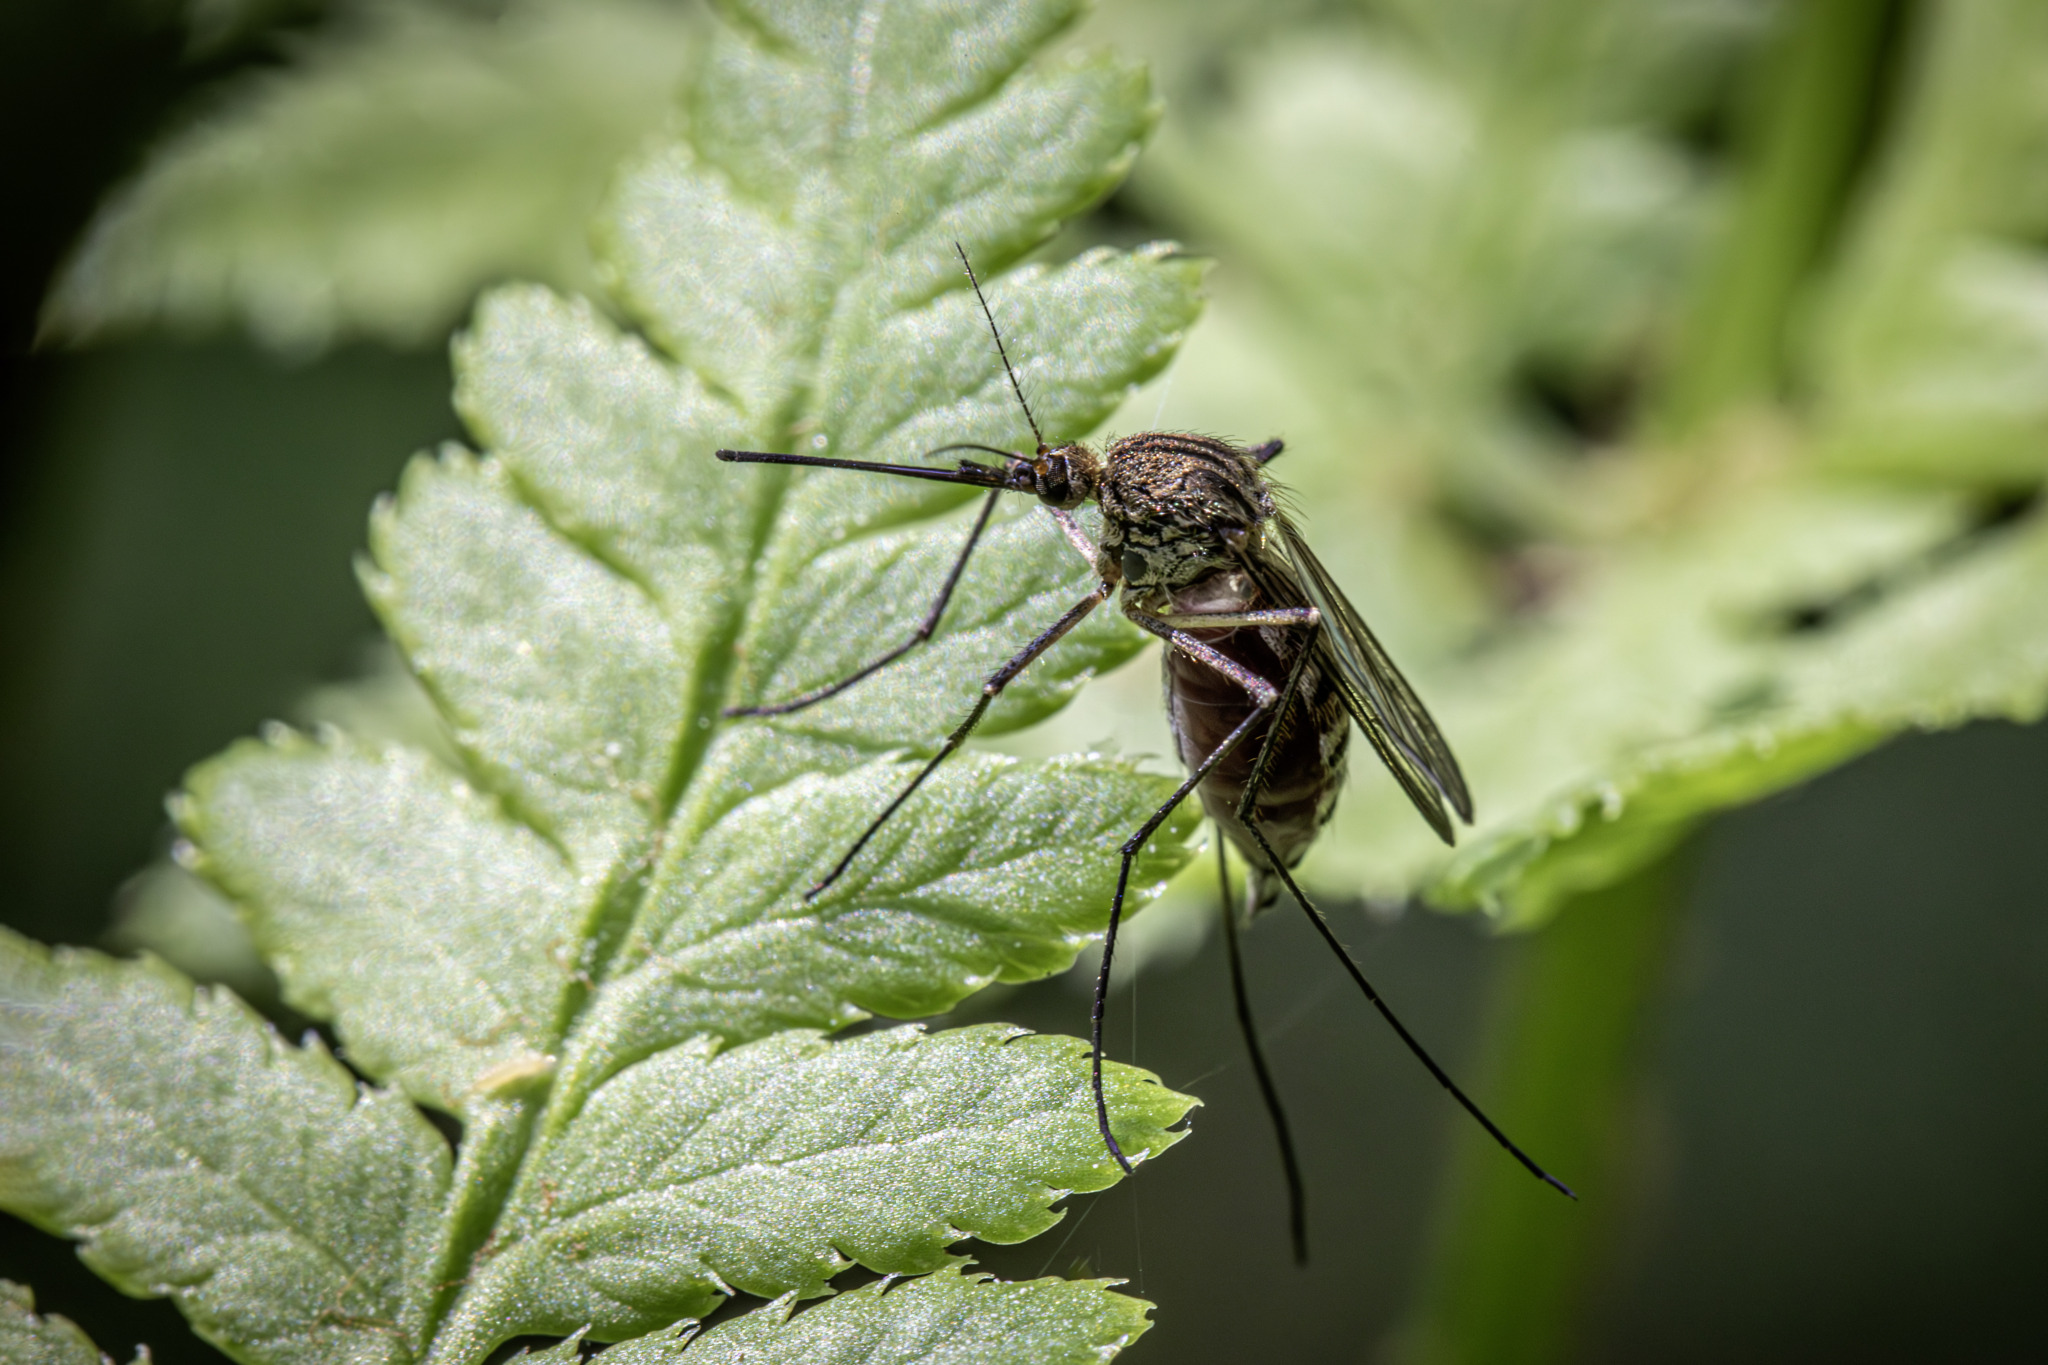 Inland floodwater mosquito (Aedes vexans)